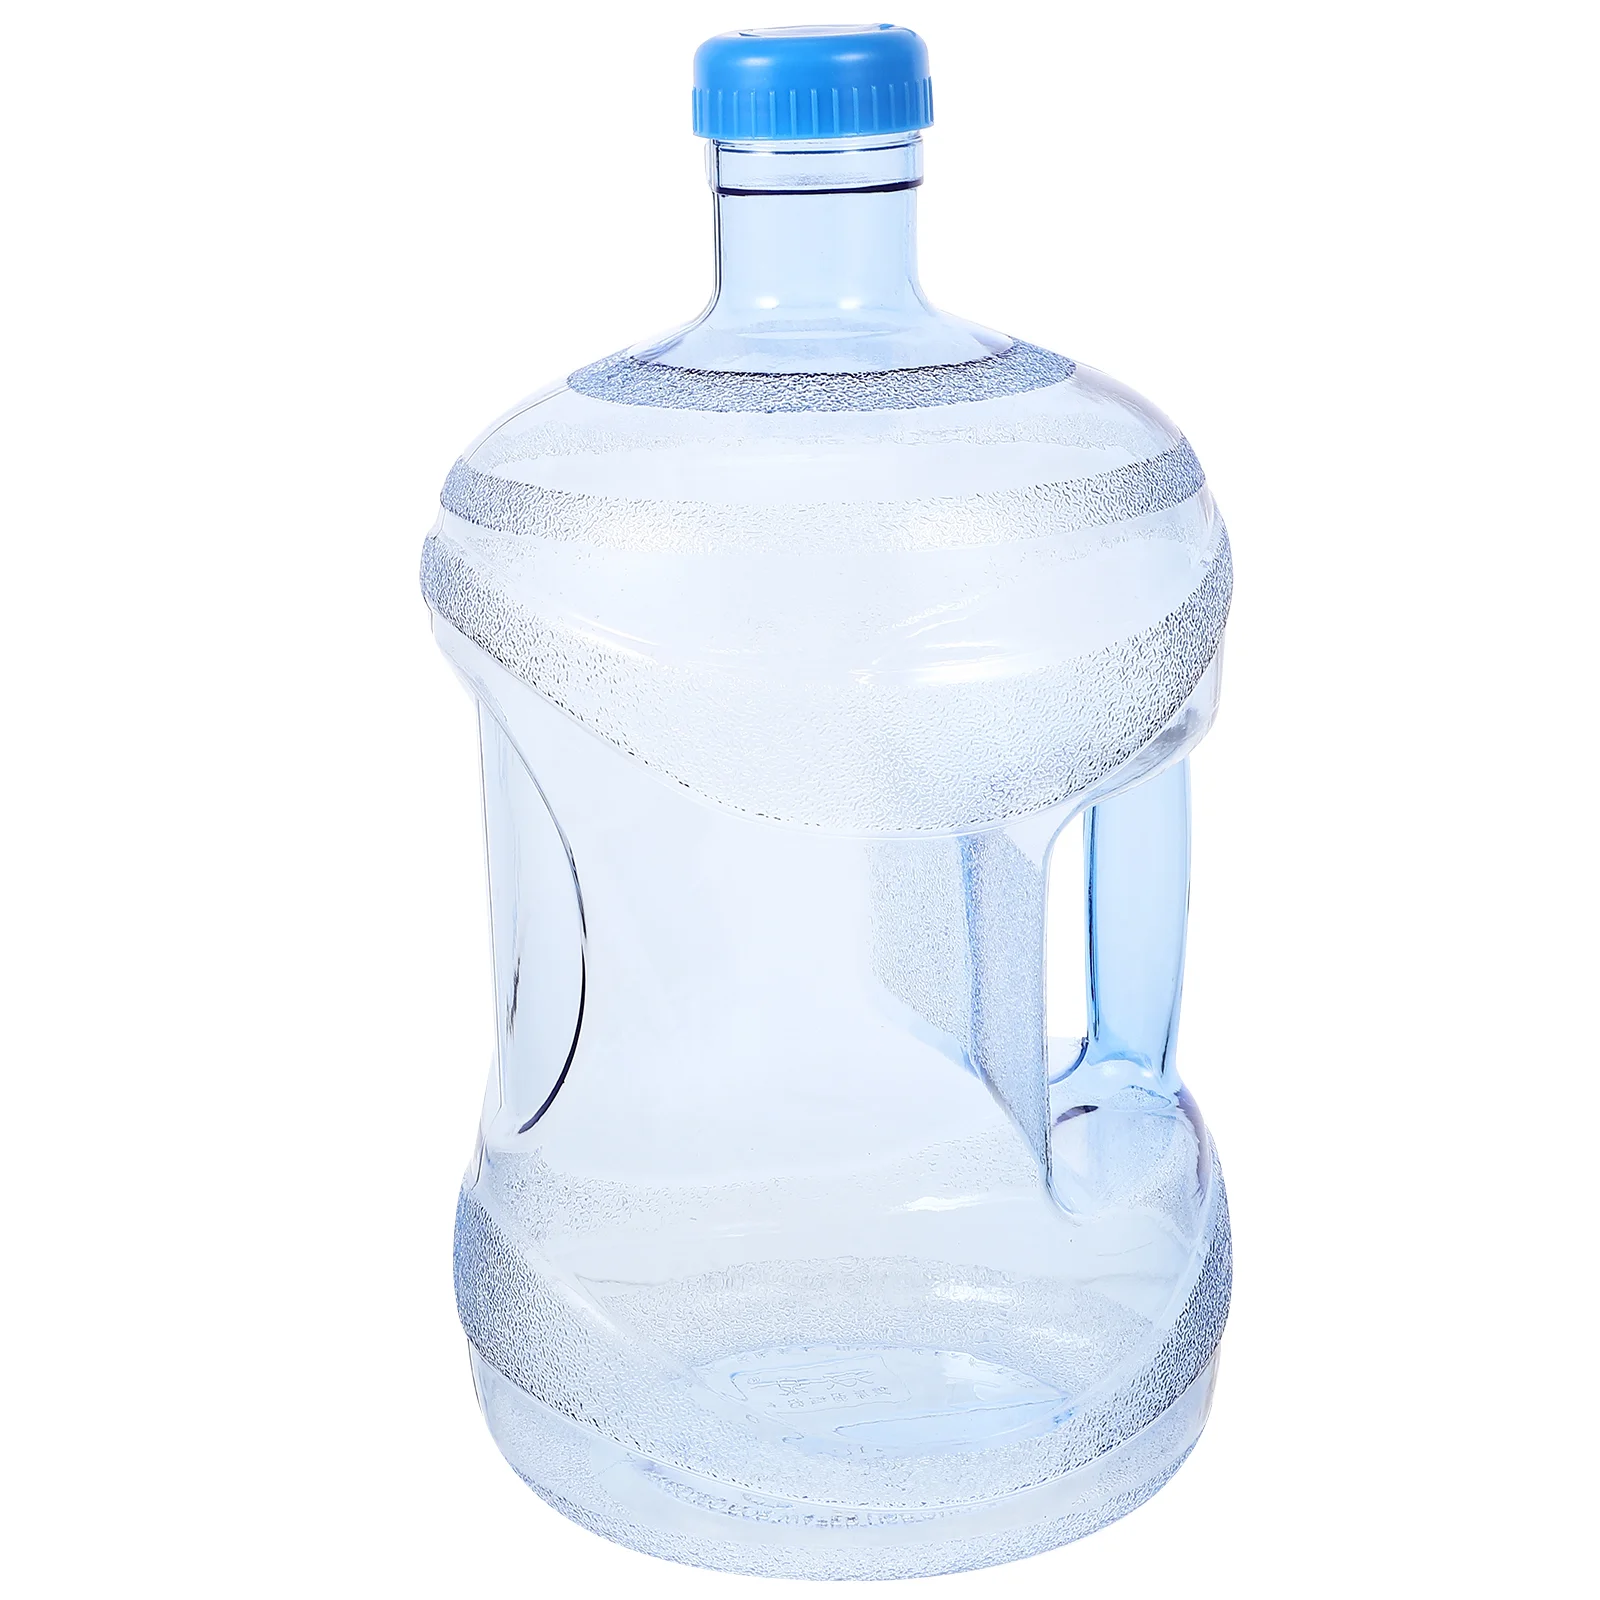 

Water Jug Bottle Gallon Containers Container Bucket Plastic Camping Jugs Handle 5L Portable Bottles Empty Carrier Drinking